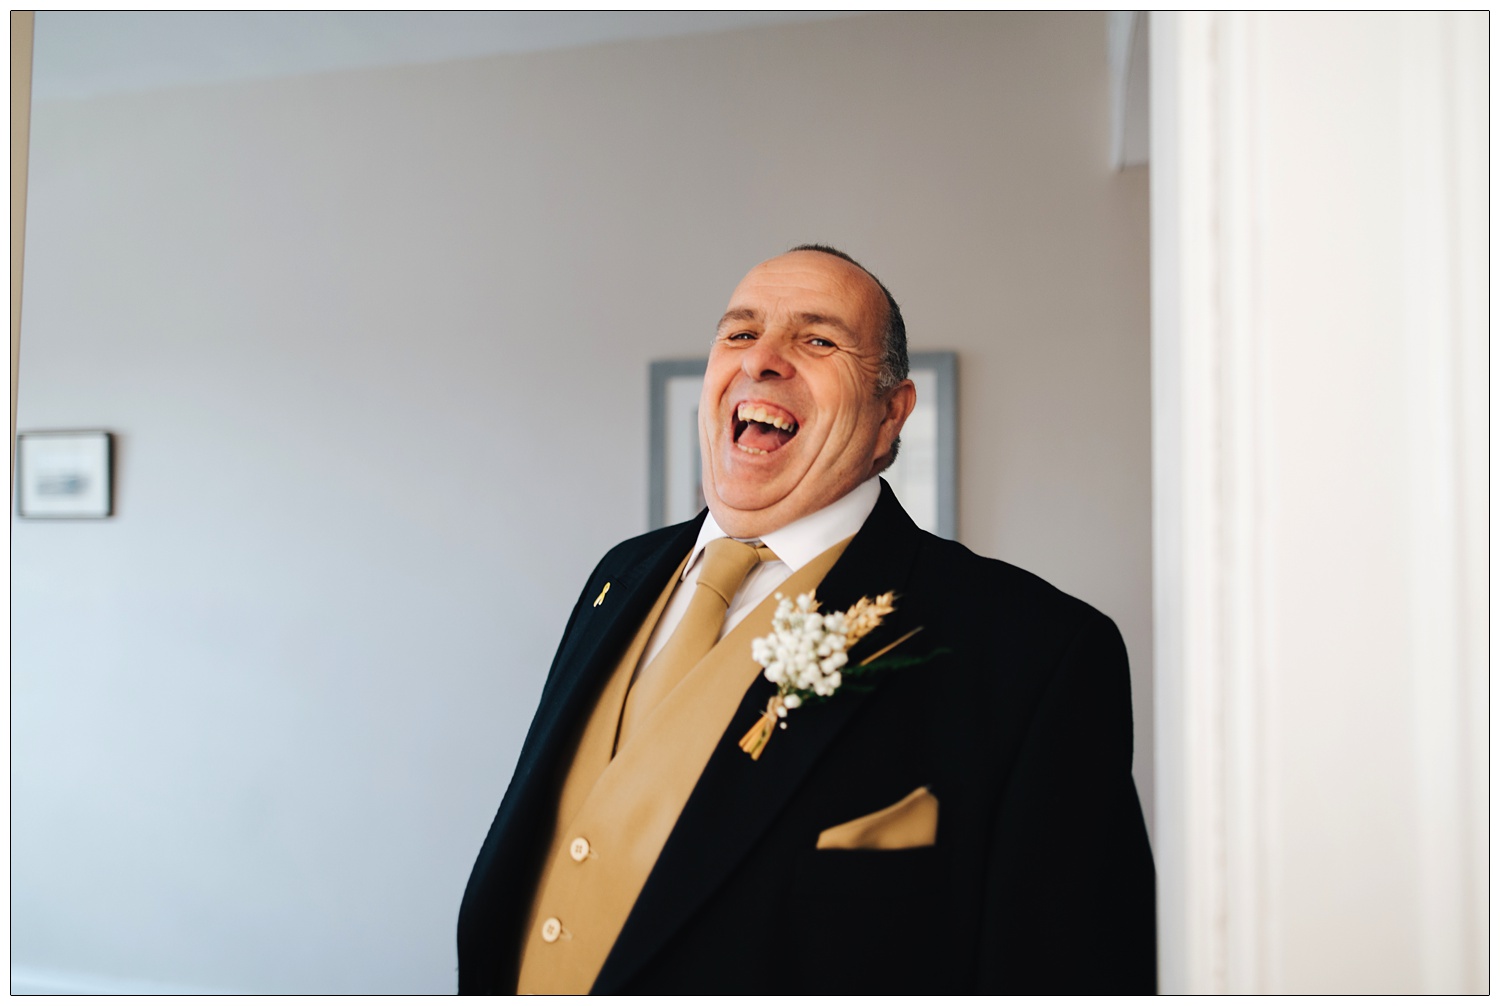 Father of the bride dressed in his suit laughing at the camera.